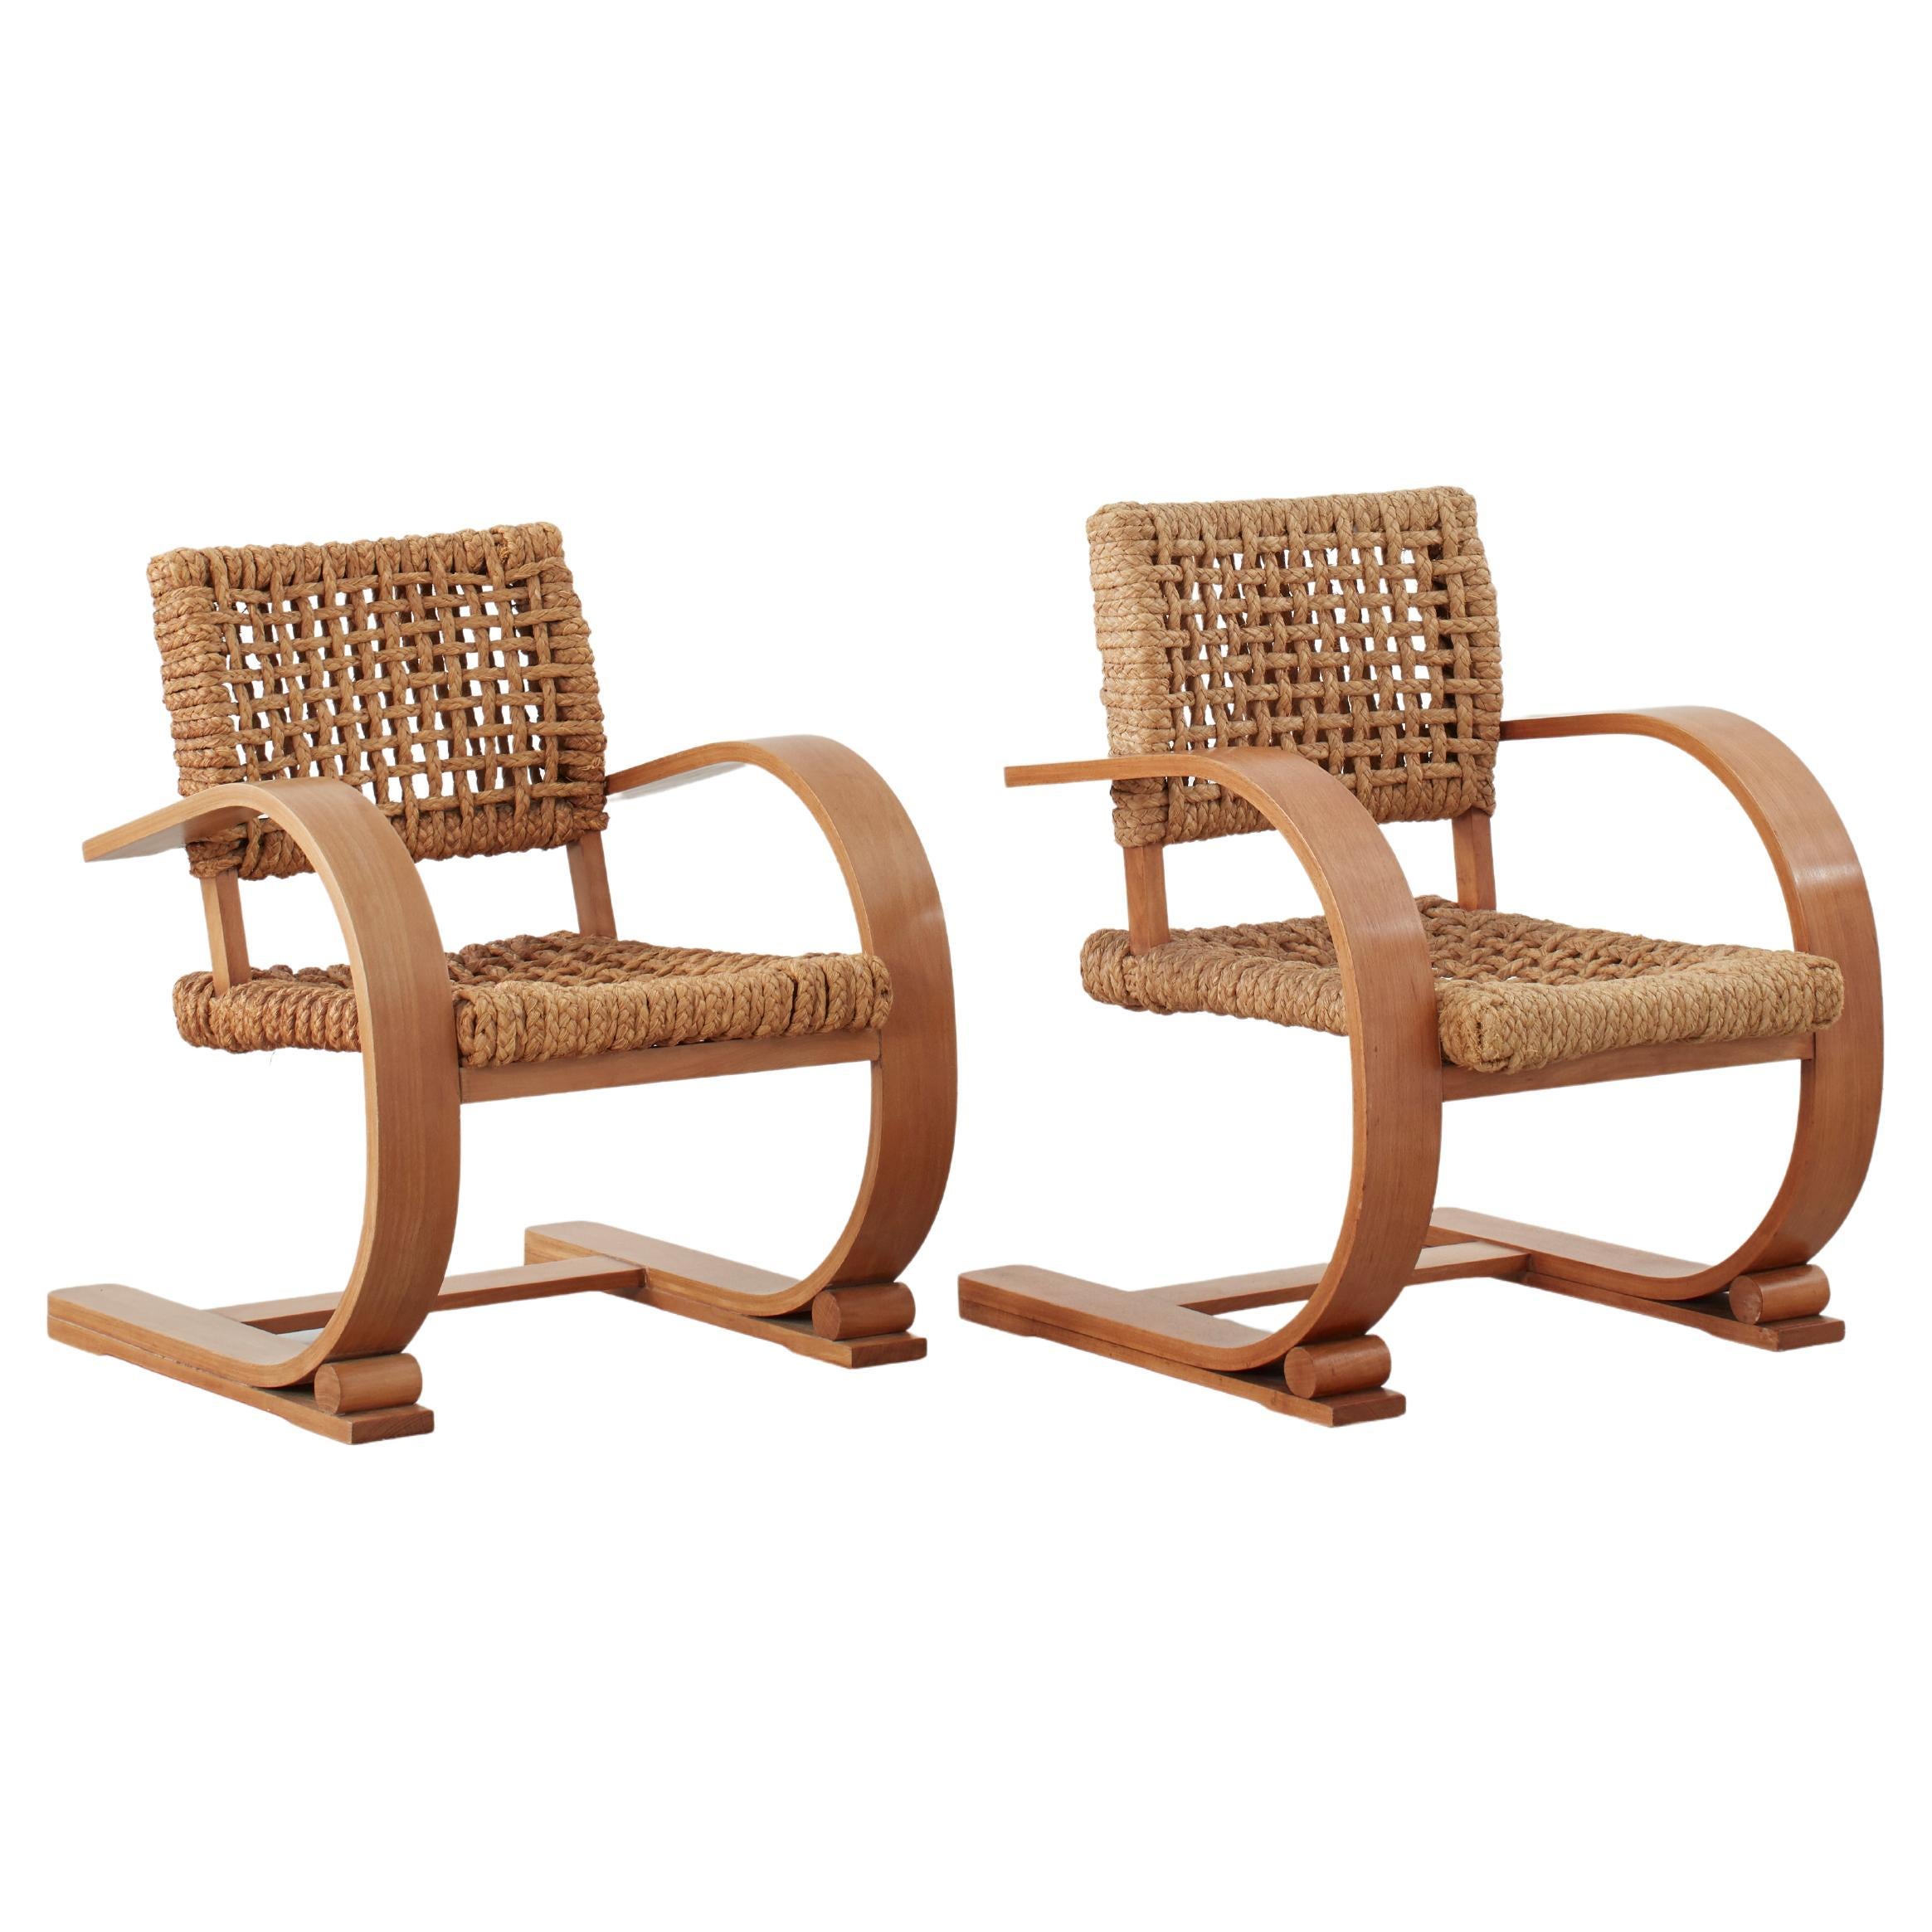 Pair of Pair of Audoux & Minet Rope Armchairs for Vibo Vesoul, France, c1940